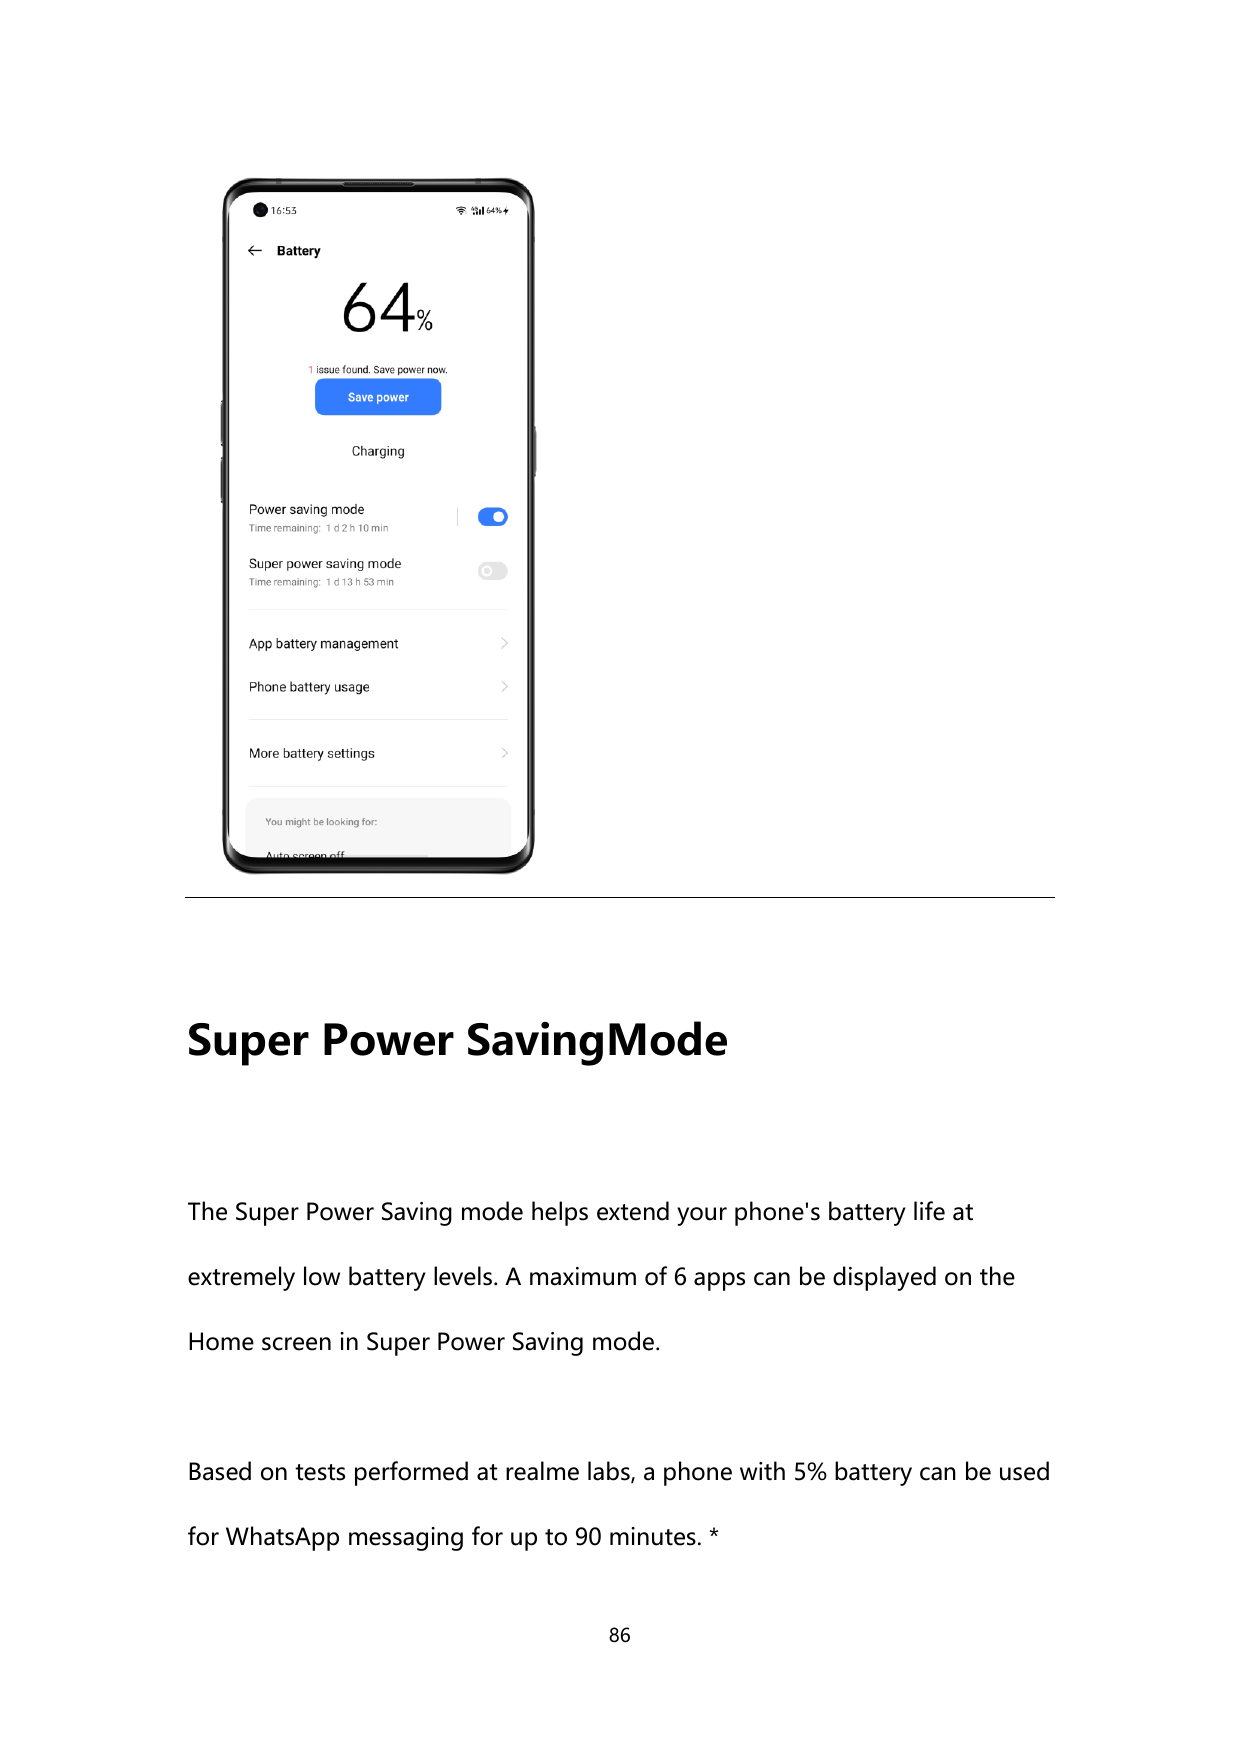 Super Power SavingModeThe Super Power Saving mode helps extend your phone's battery life atextremely low battery levels. A maxim